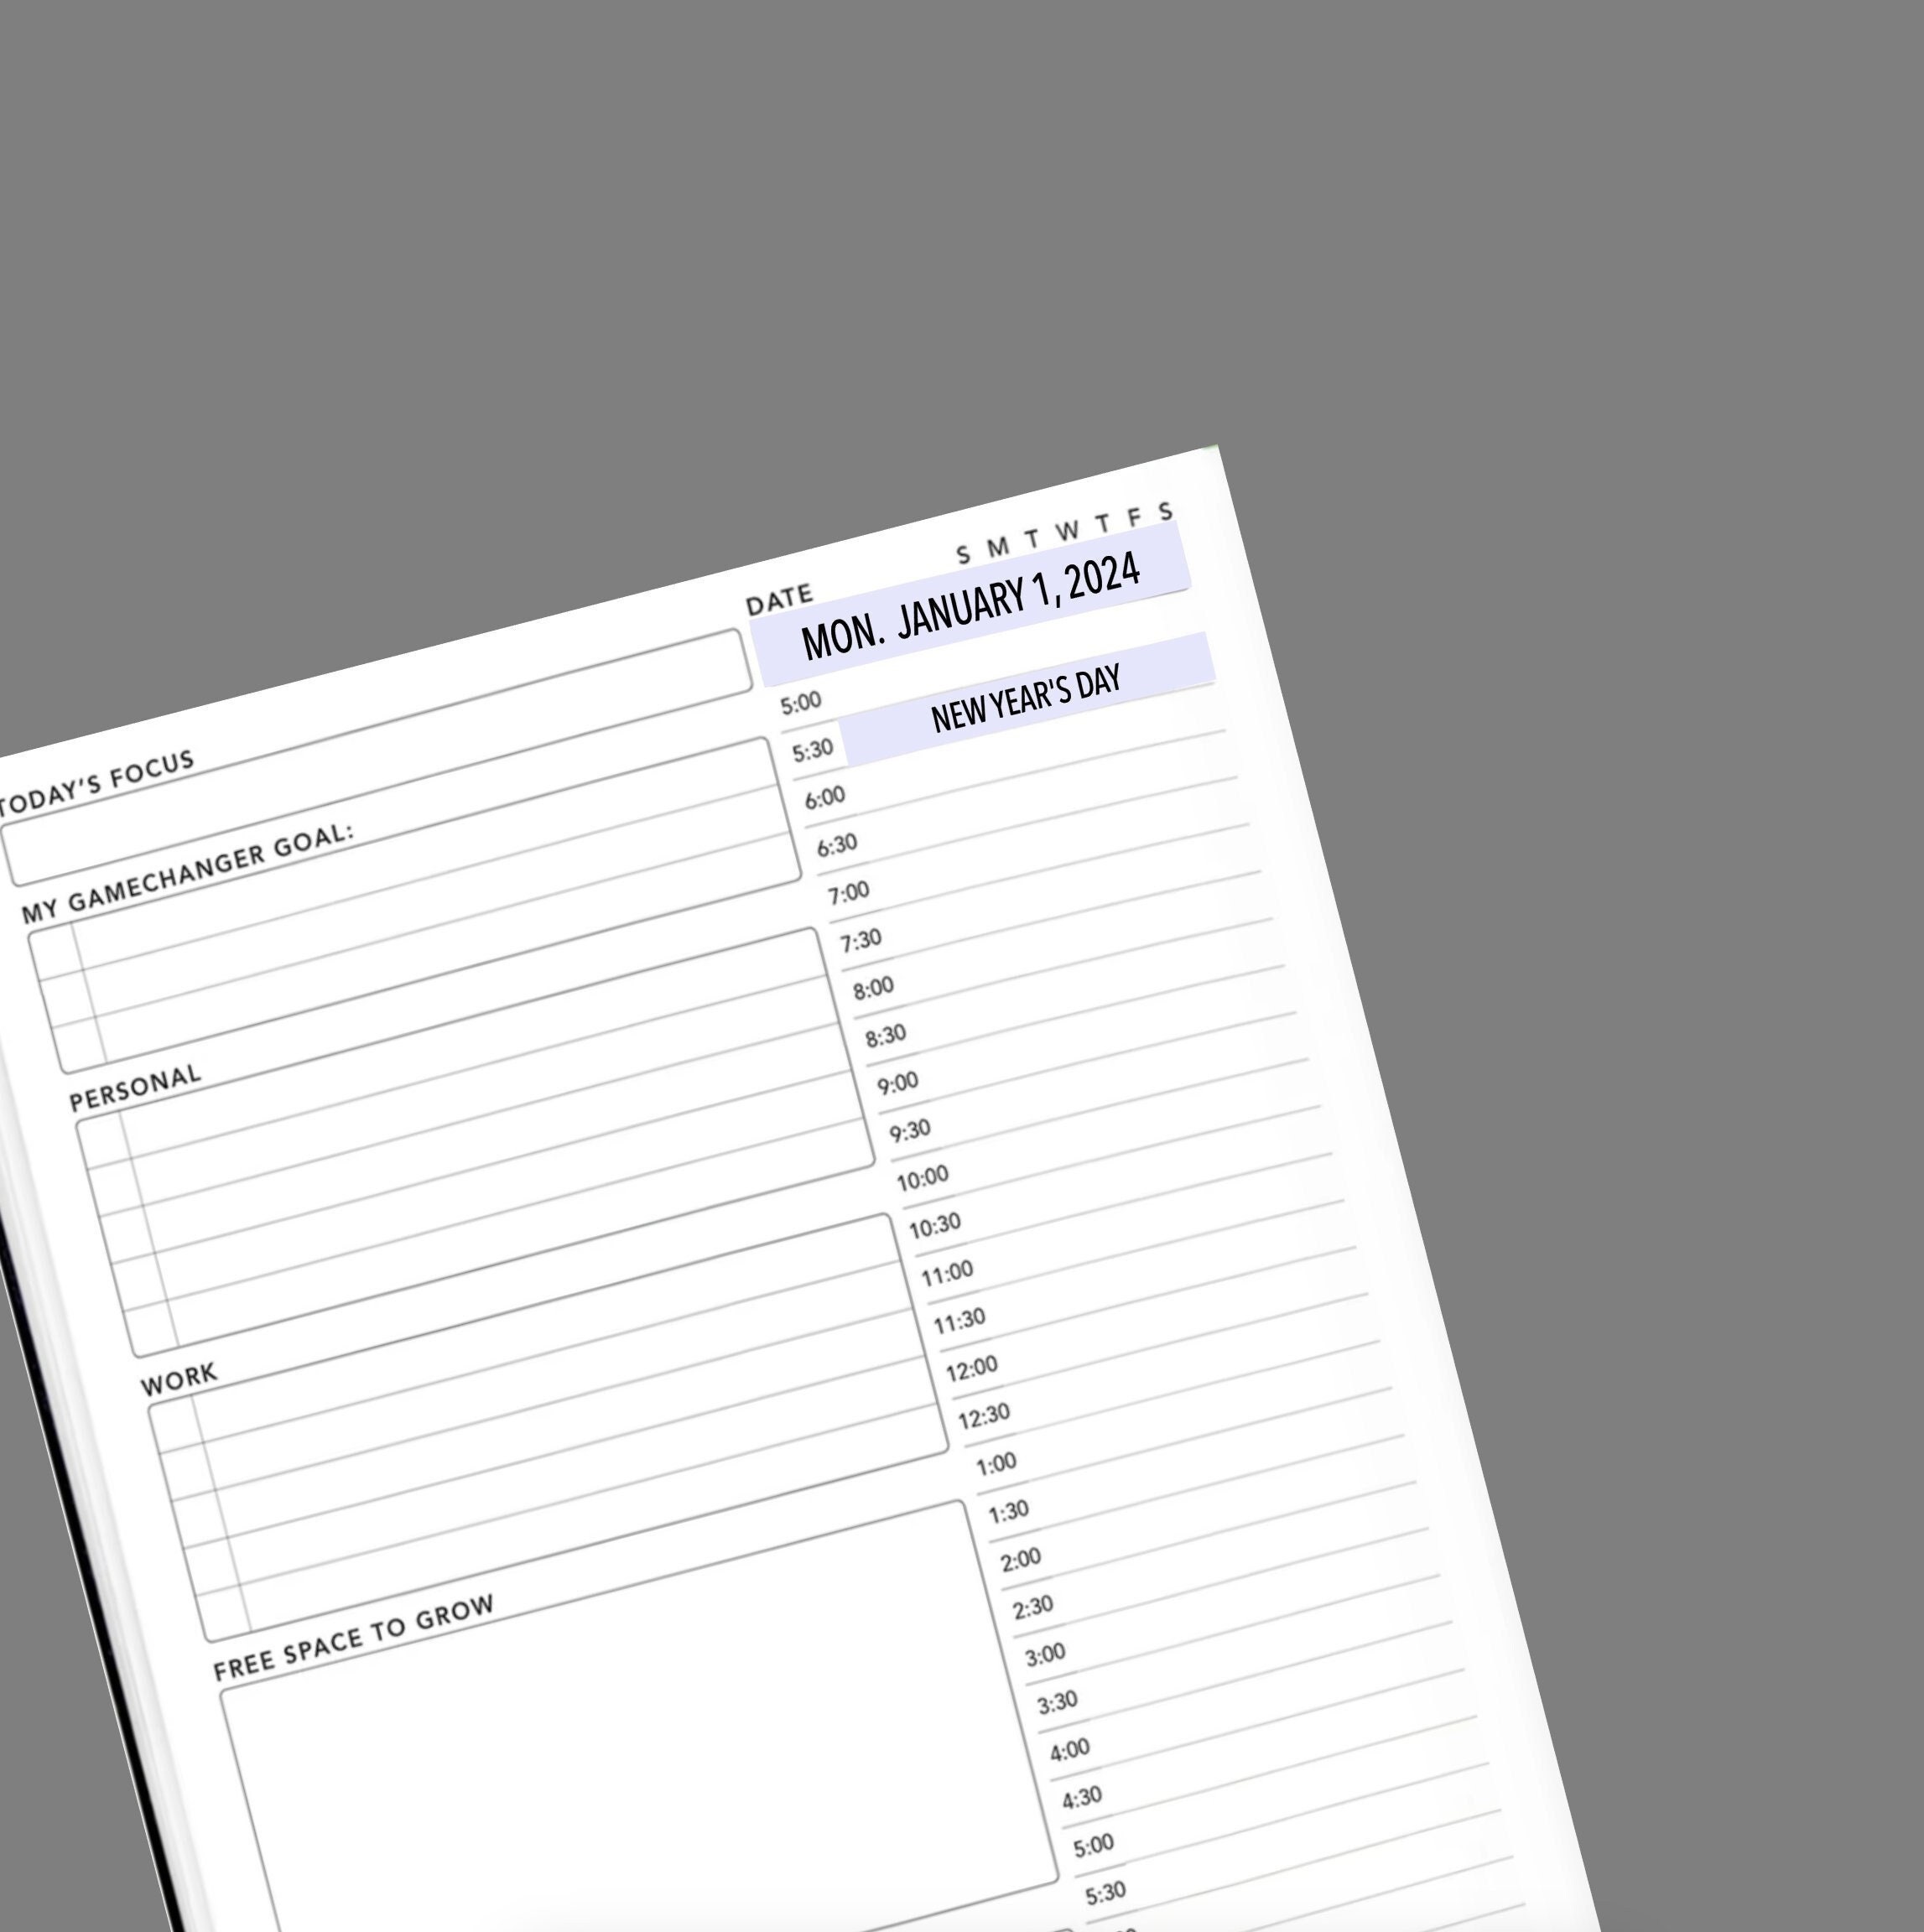 Using The  Hole Punch PU462 With Template For A5 B6 Planners 